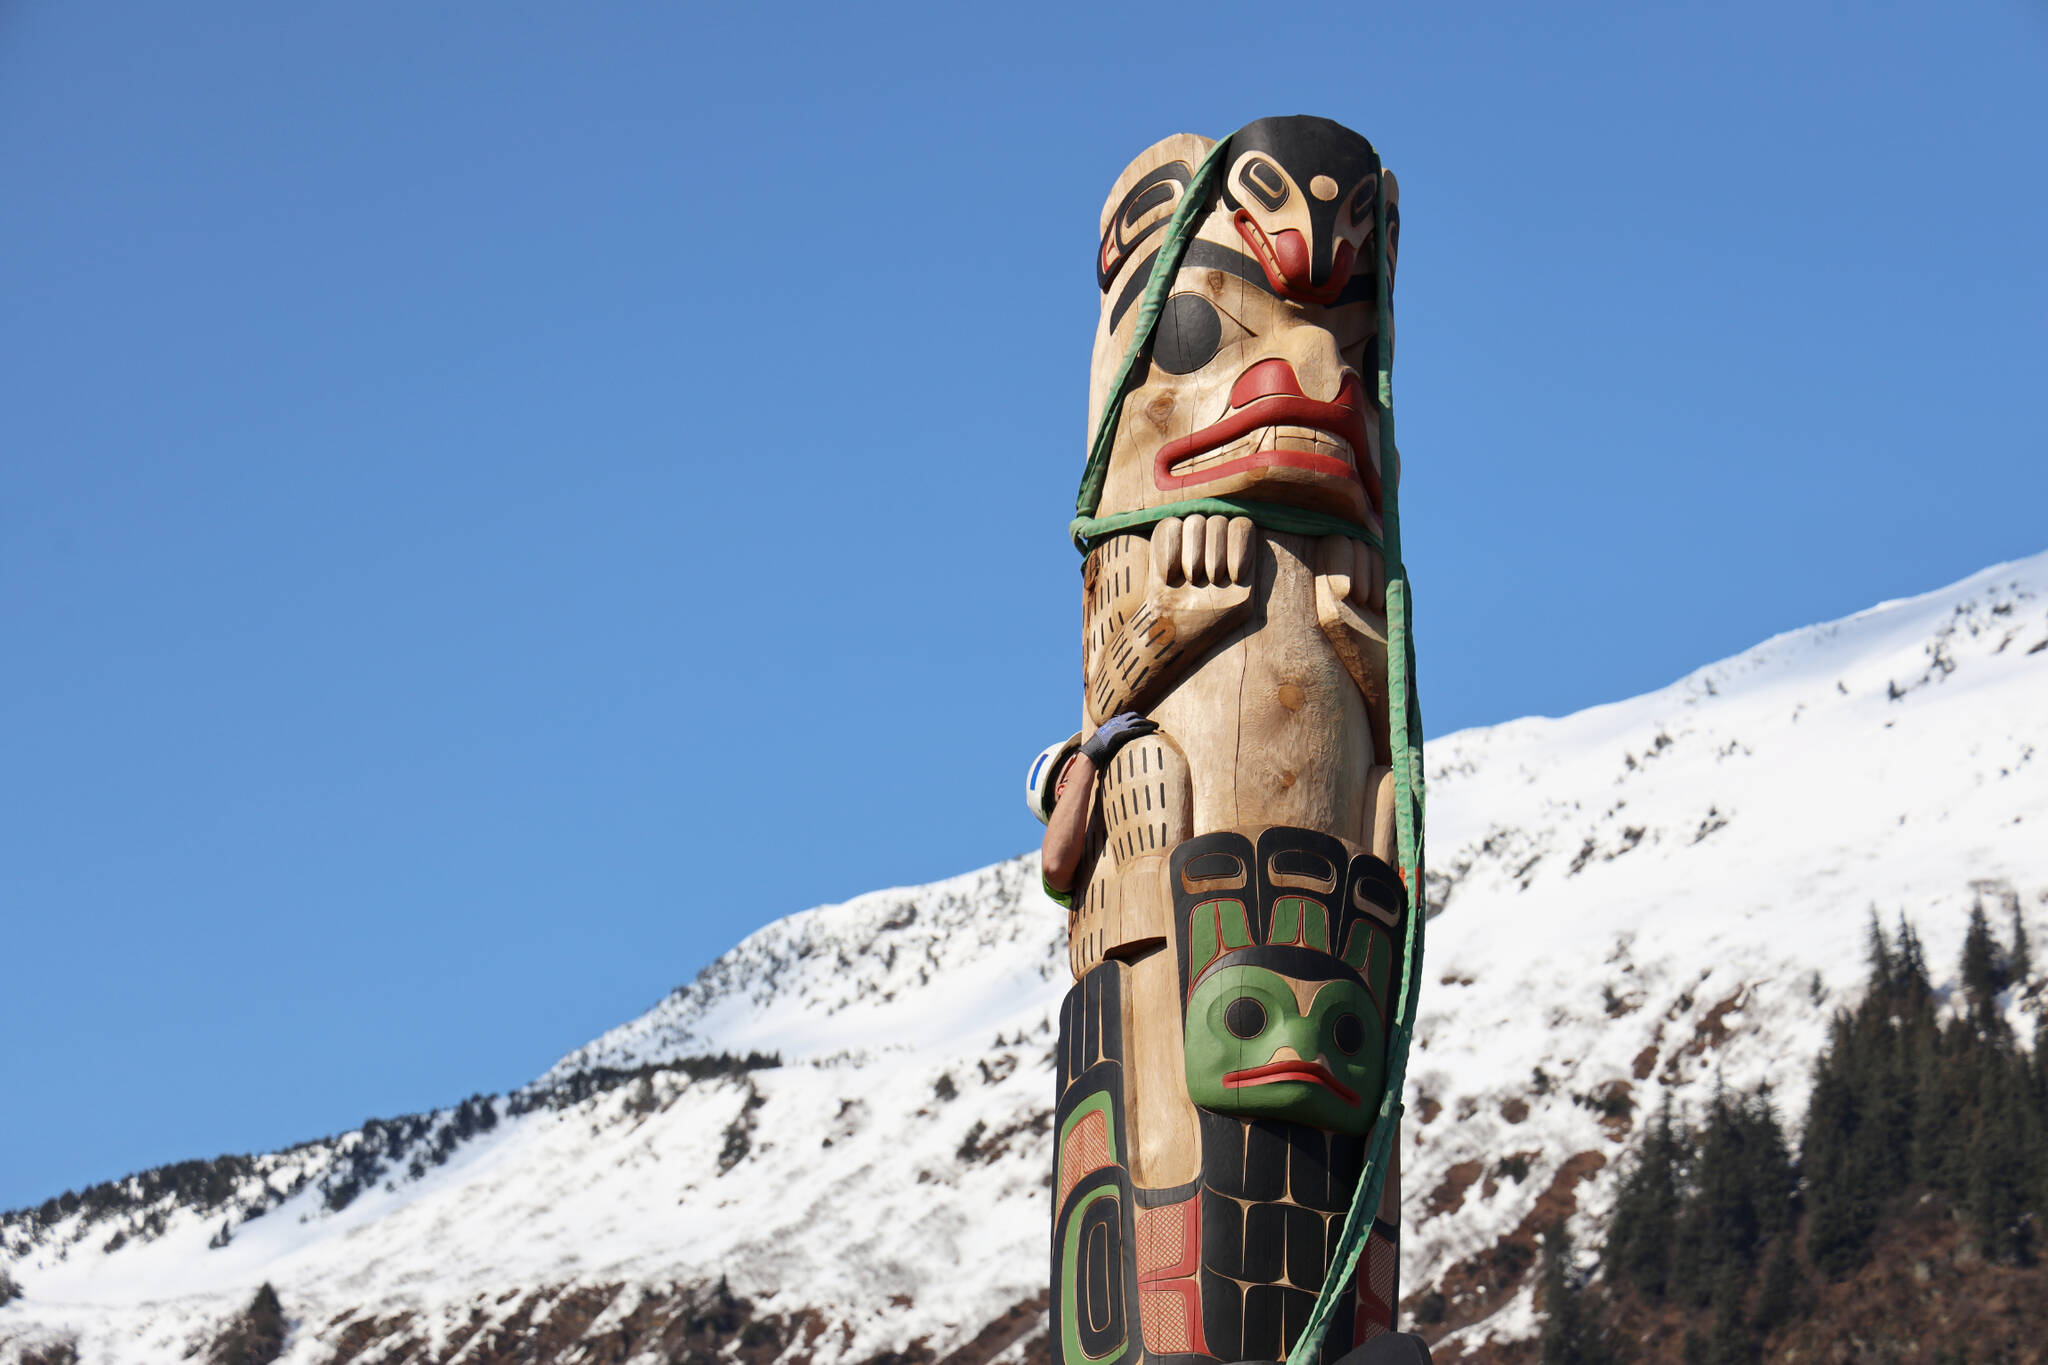 The sun glistens off a totem pole by Tsimshian carver Gyibaawm Laxha David Robert Boxley after it was raised at Overstreet Park Sunday afternoon. The pole is one of the first 12 of 30 totem poles to be raised to create a Kootéeyaa Deiyí (totem pole trail) lining the waterfront in Juneau. (Clarise Larson / Juneau Empire)